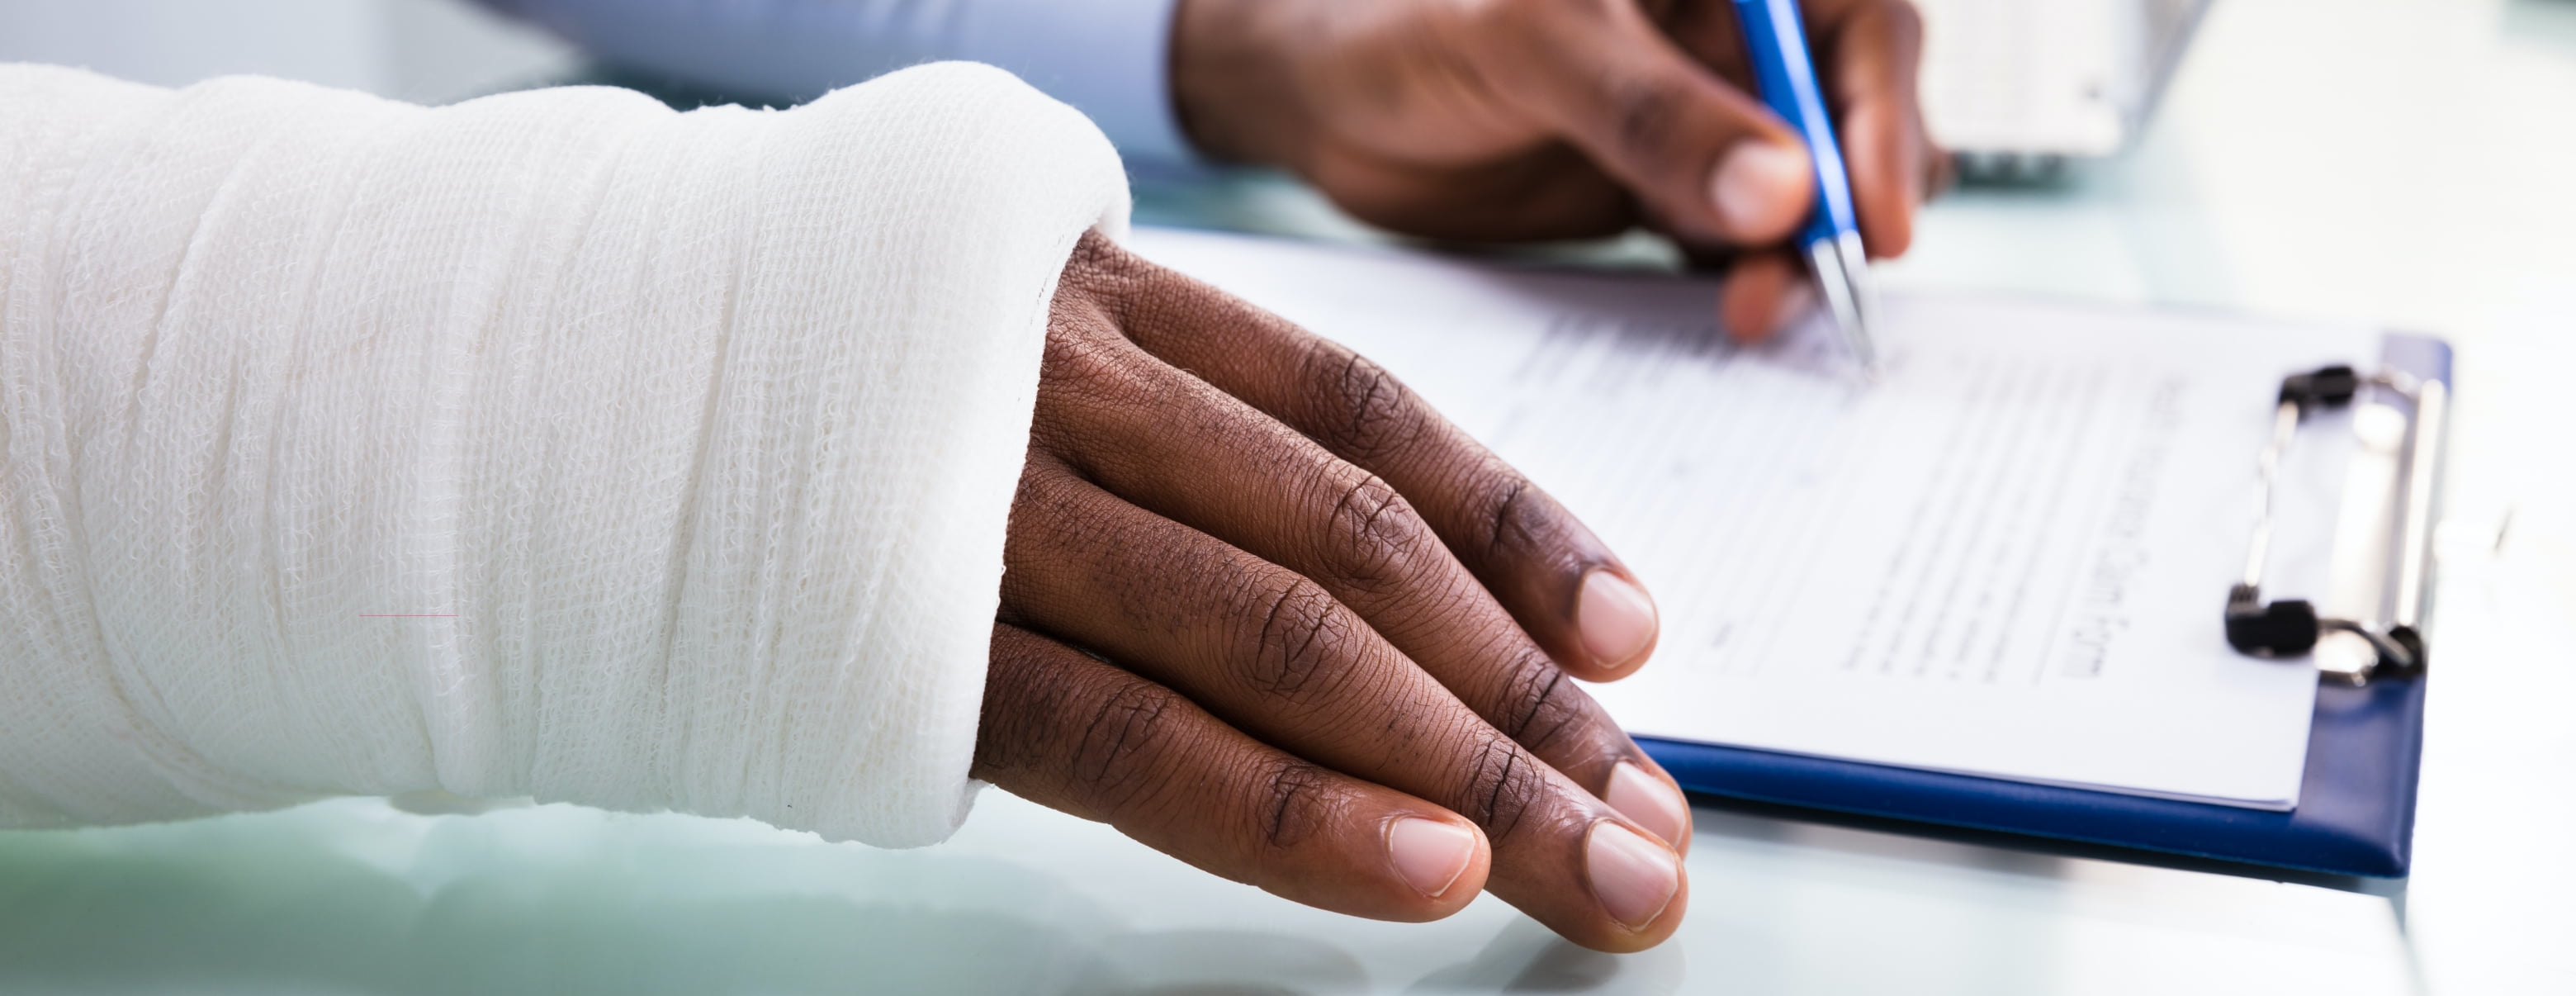 Hand injured in workers' compensation claim in Arizona